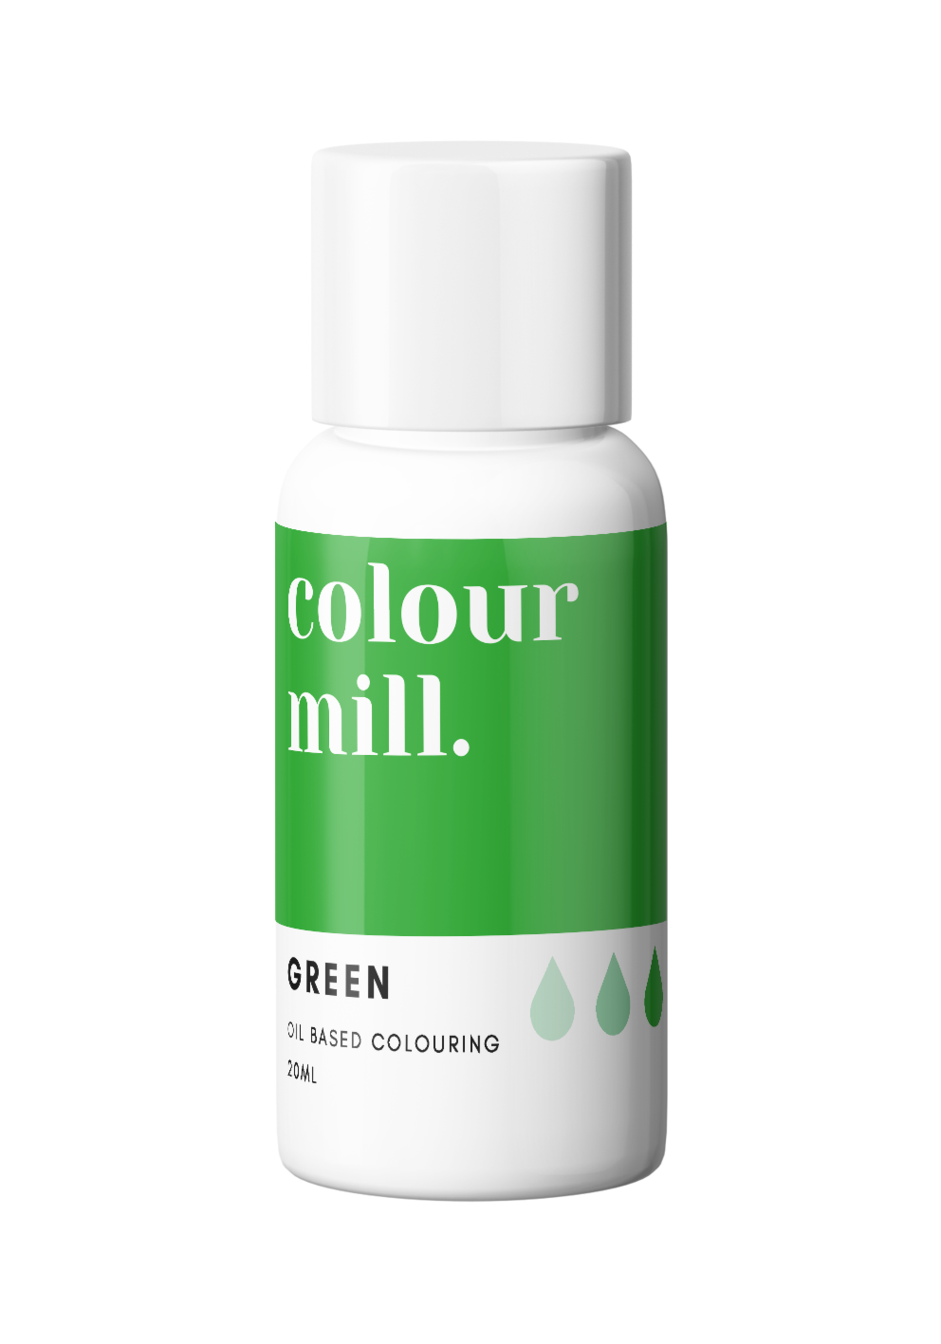 Green, 20ml, Colour Mill Oil Based Colouring